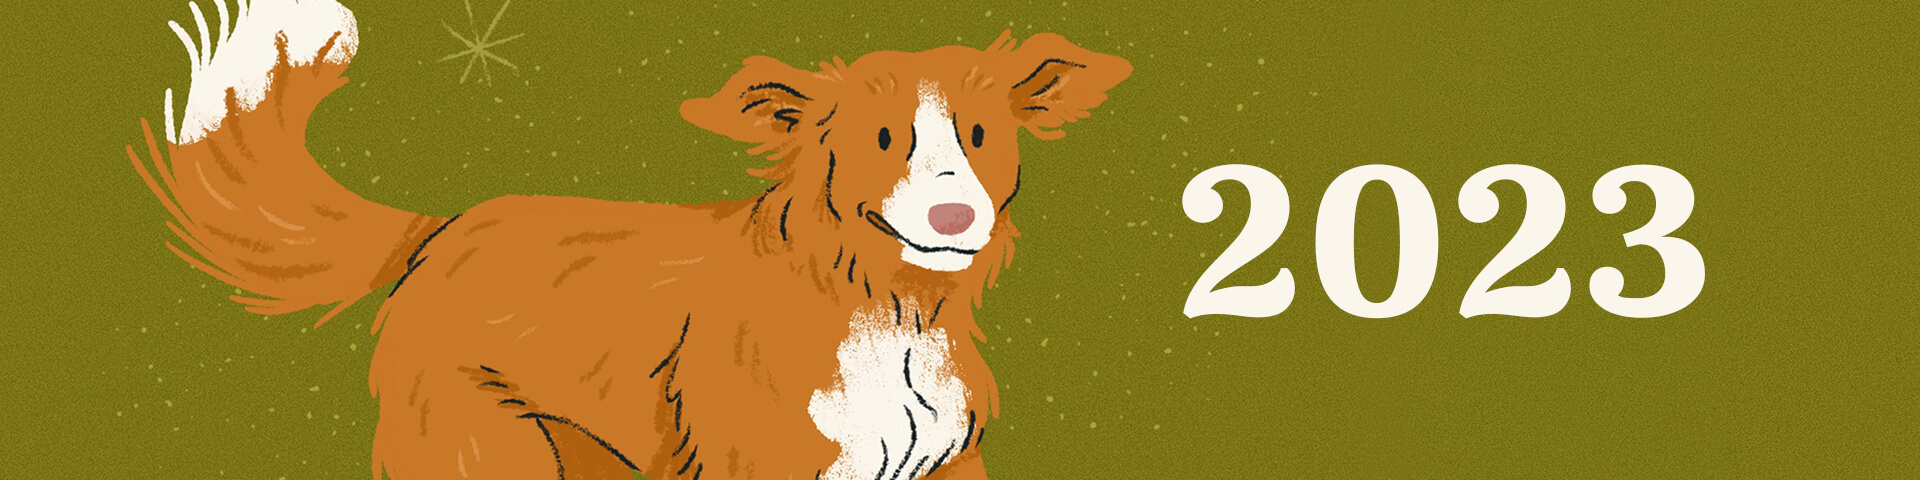 an illustrated banner of a nova scotia duck tolling retriever running on a bright olive-y green background. The word 2023 is written on the right hand side in a serif font